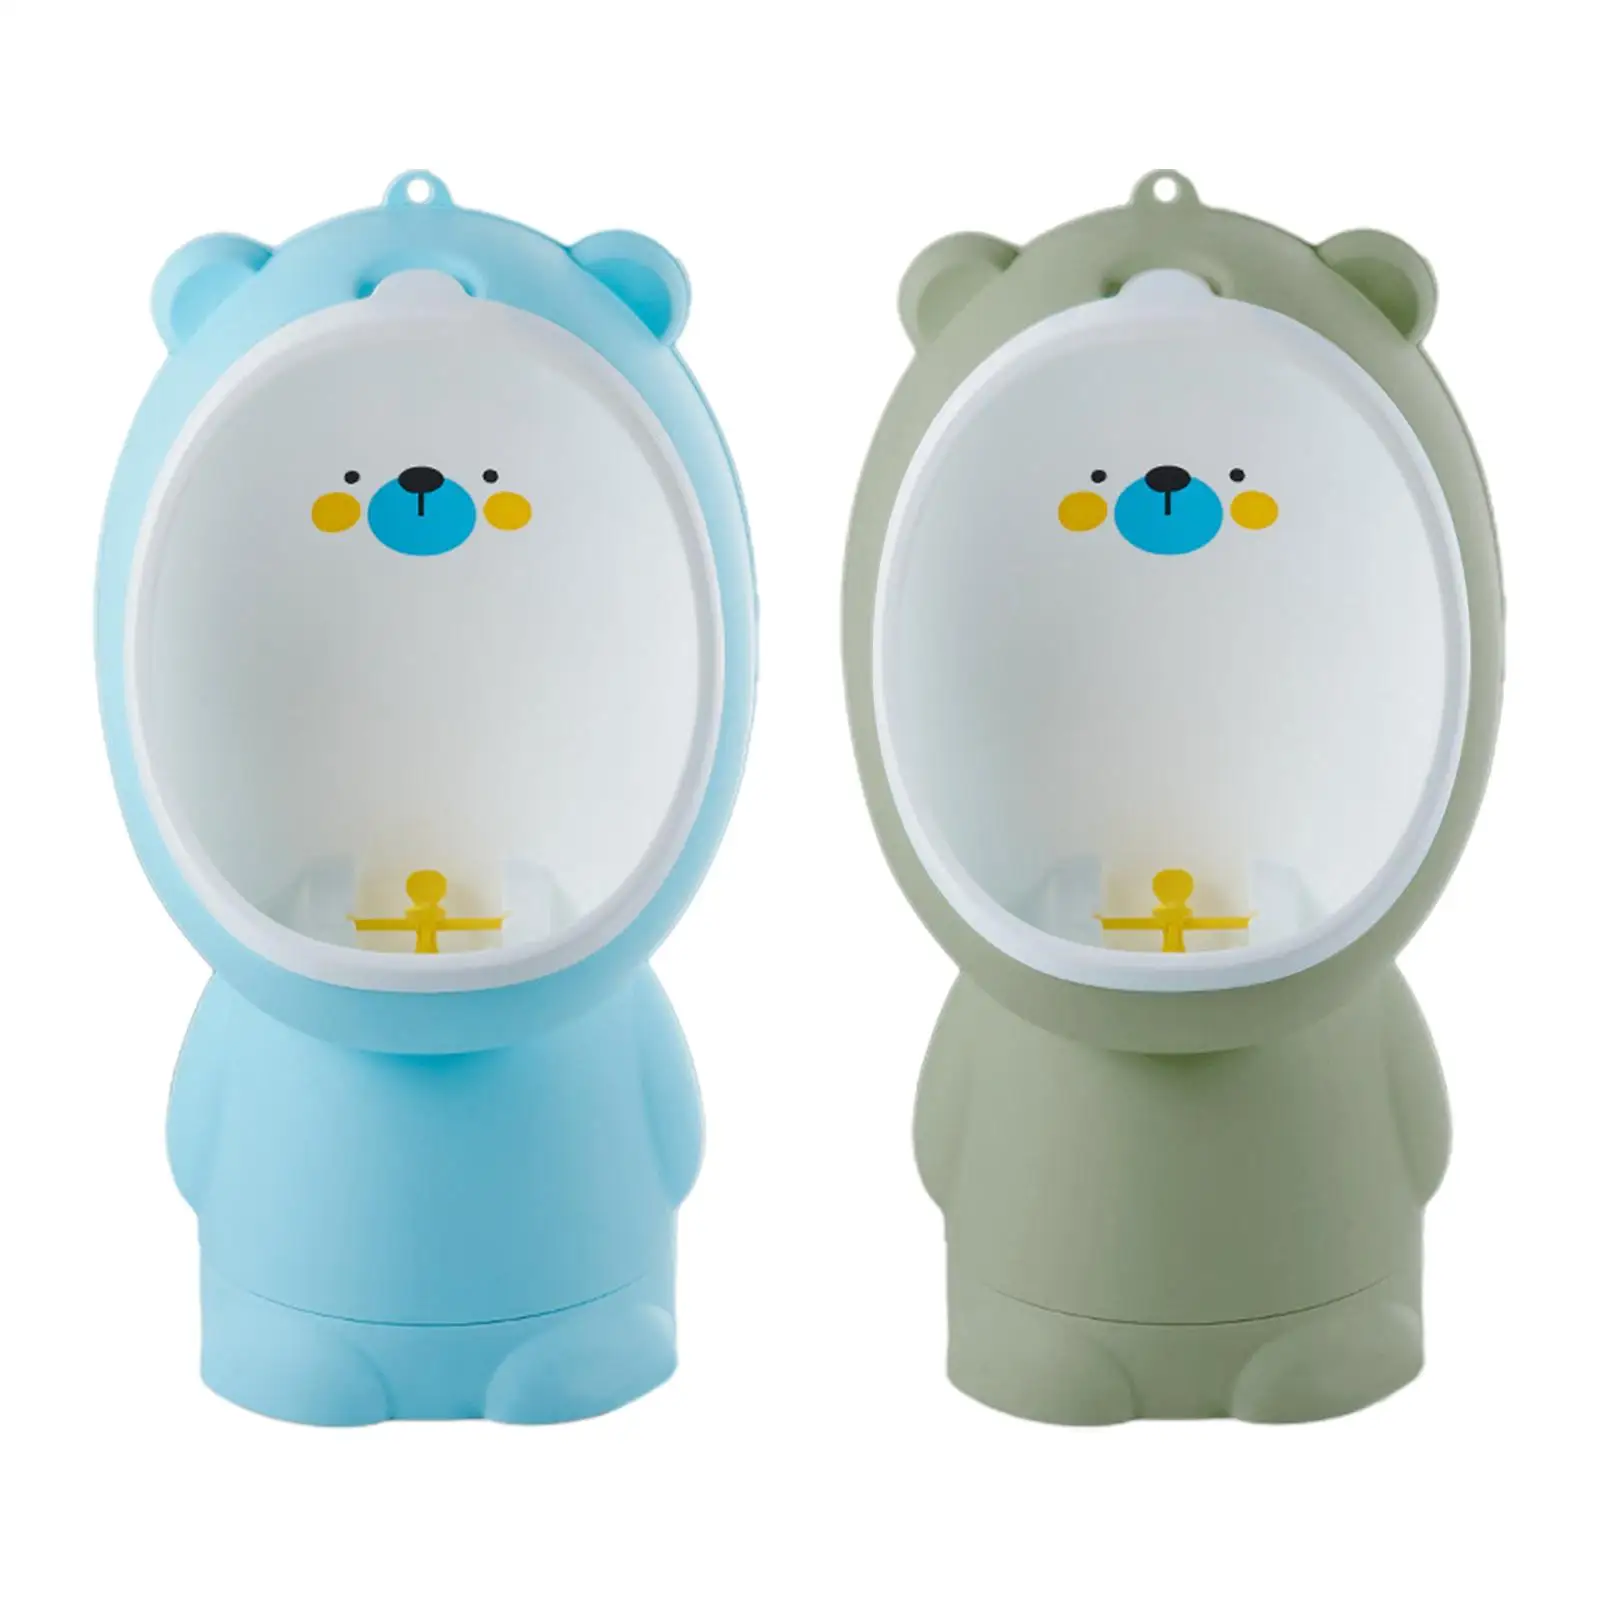 Hanging Pee Trainer Adjustable Height with Aiming Target Children Stand Vertical Urinal Potty Trainer Urinal for Child Kids